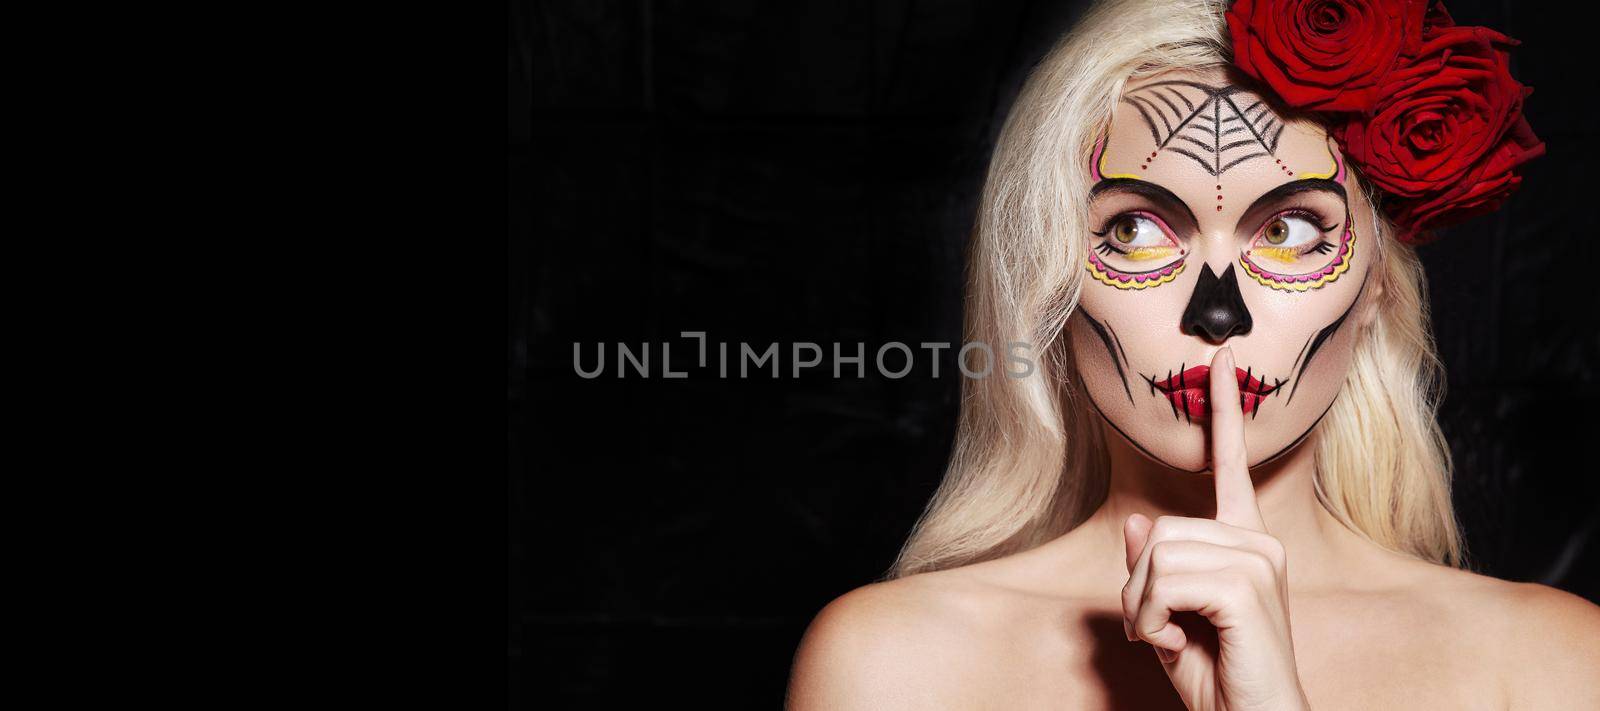 Beautiful Halloween Make-Up Style. Blond Model Wear Sugar Skull Makeup with Red Roses. Santa Muerte concept by MarinaFrost